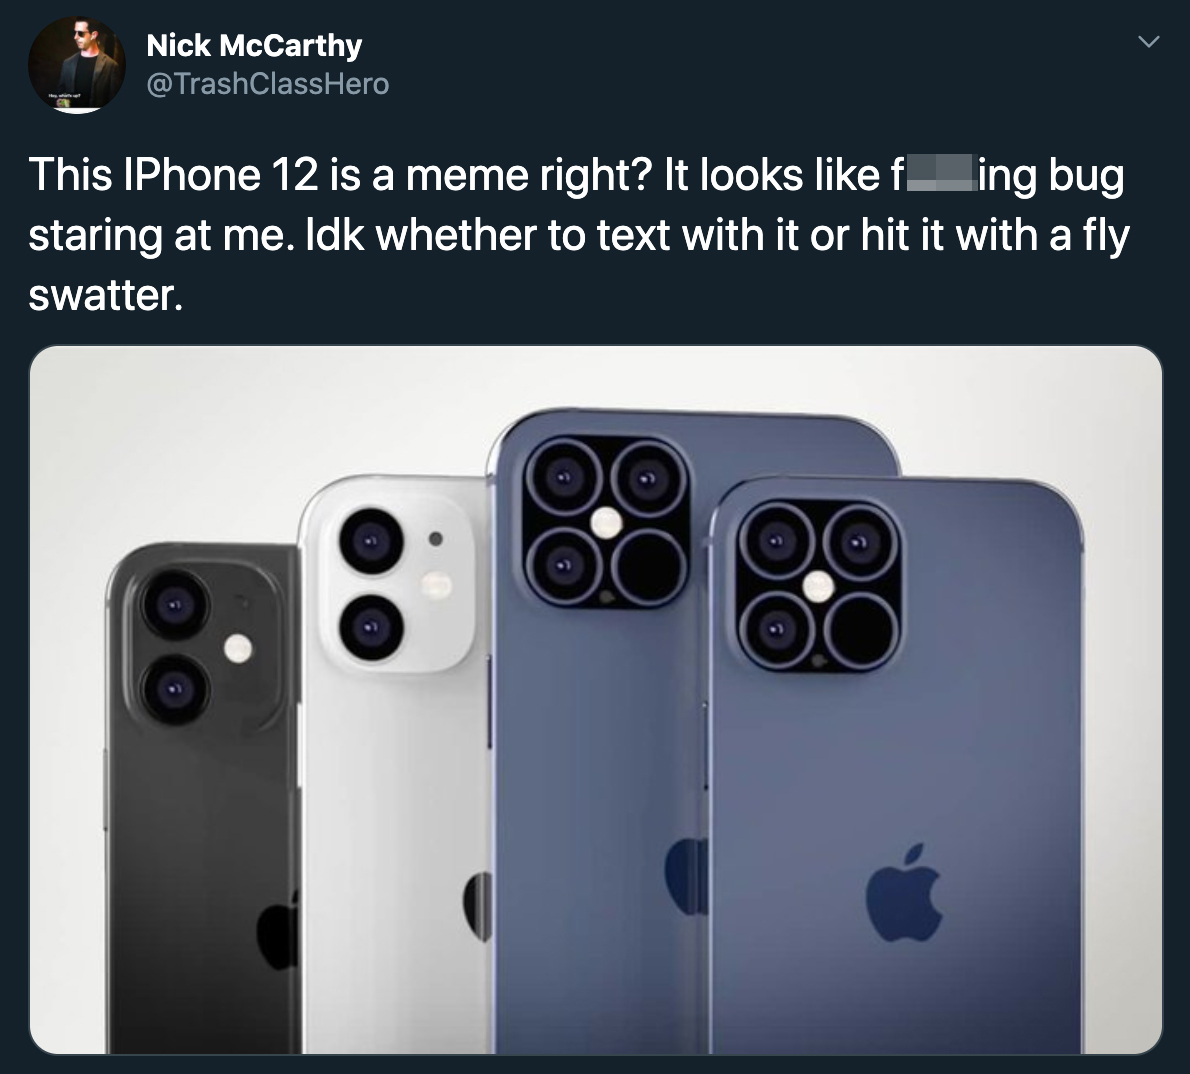 This IPhone 12 is a meme right? It looks fucking bug staring at me. Idk whether to text with it or hit it with a fly swatter.